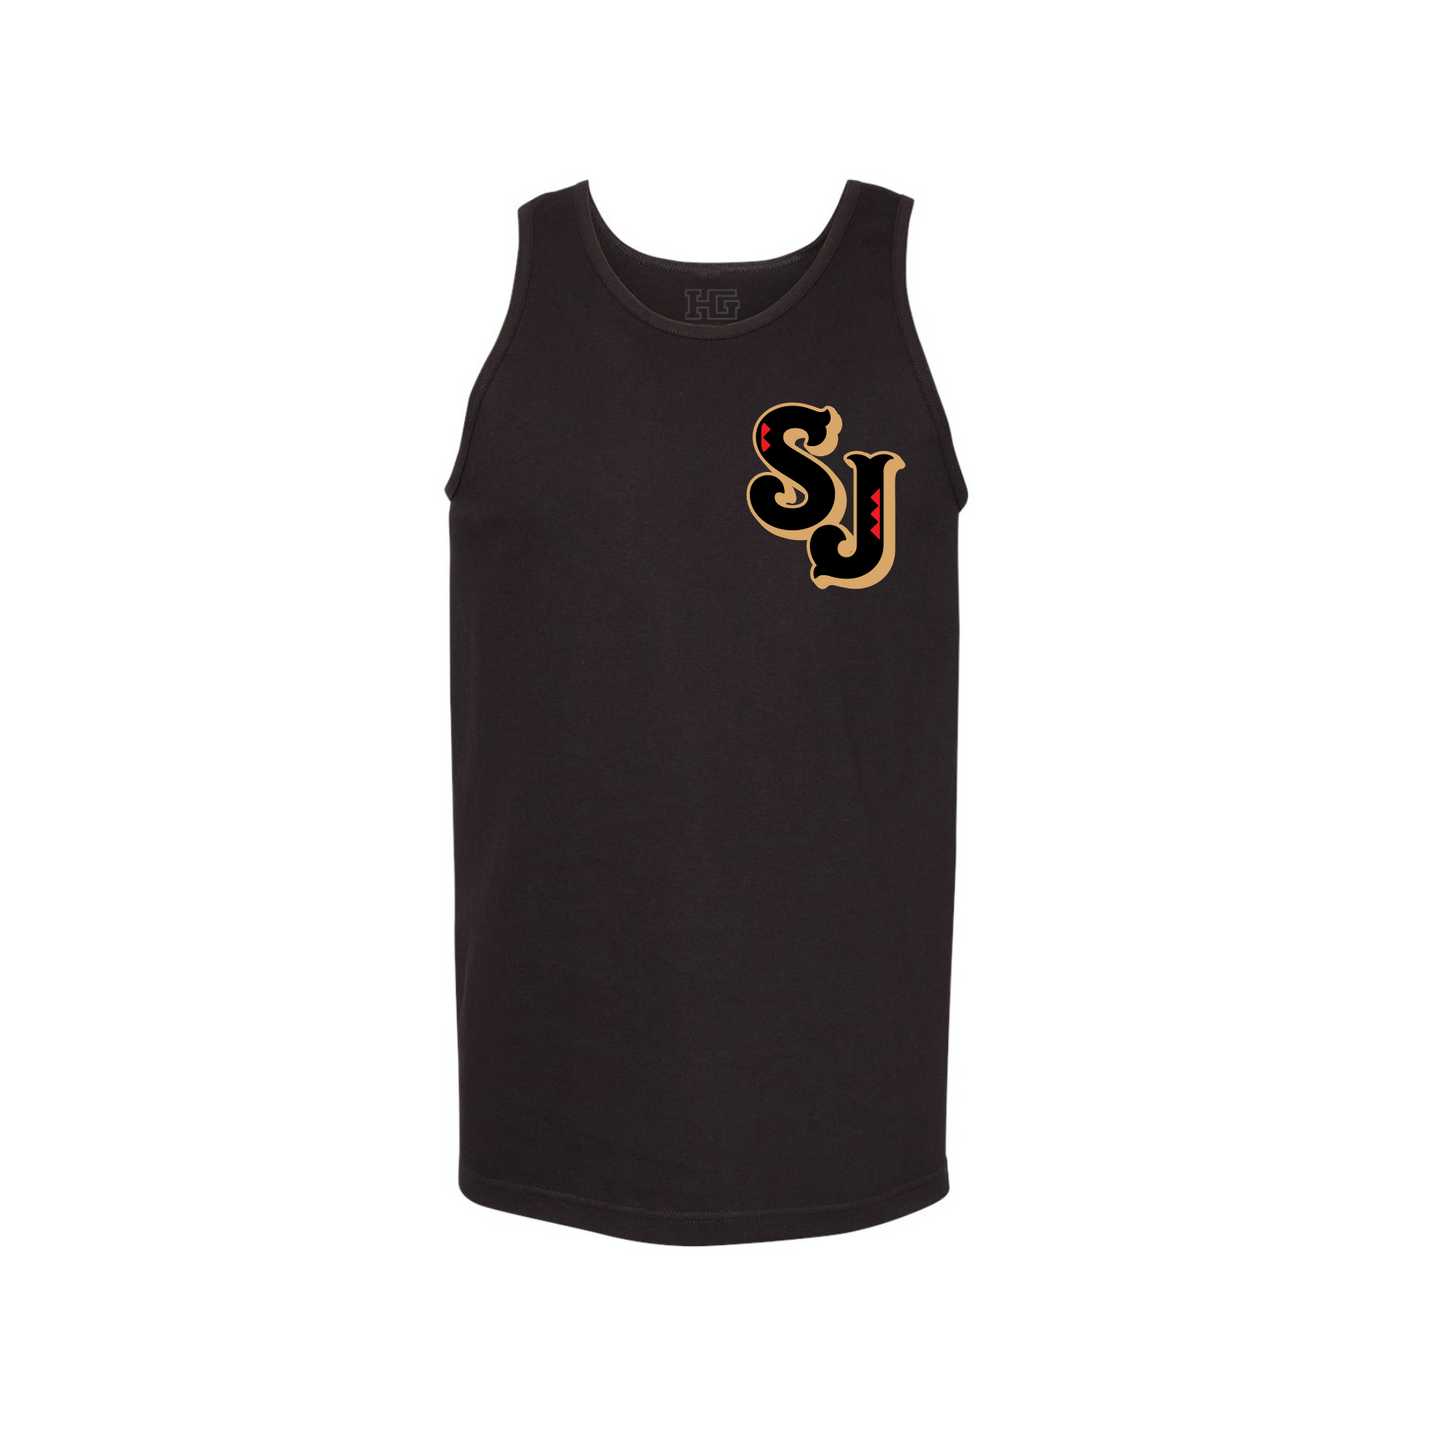 SJ Hometown Tank Top “Gold/Red/Black” - Available in 2 colors